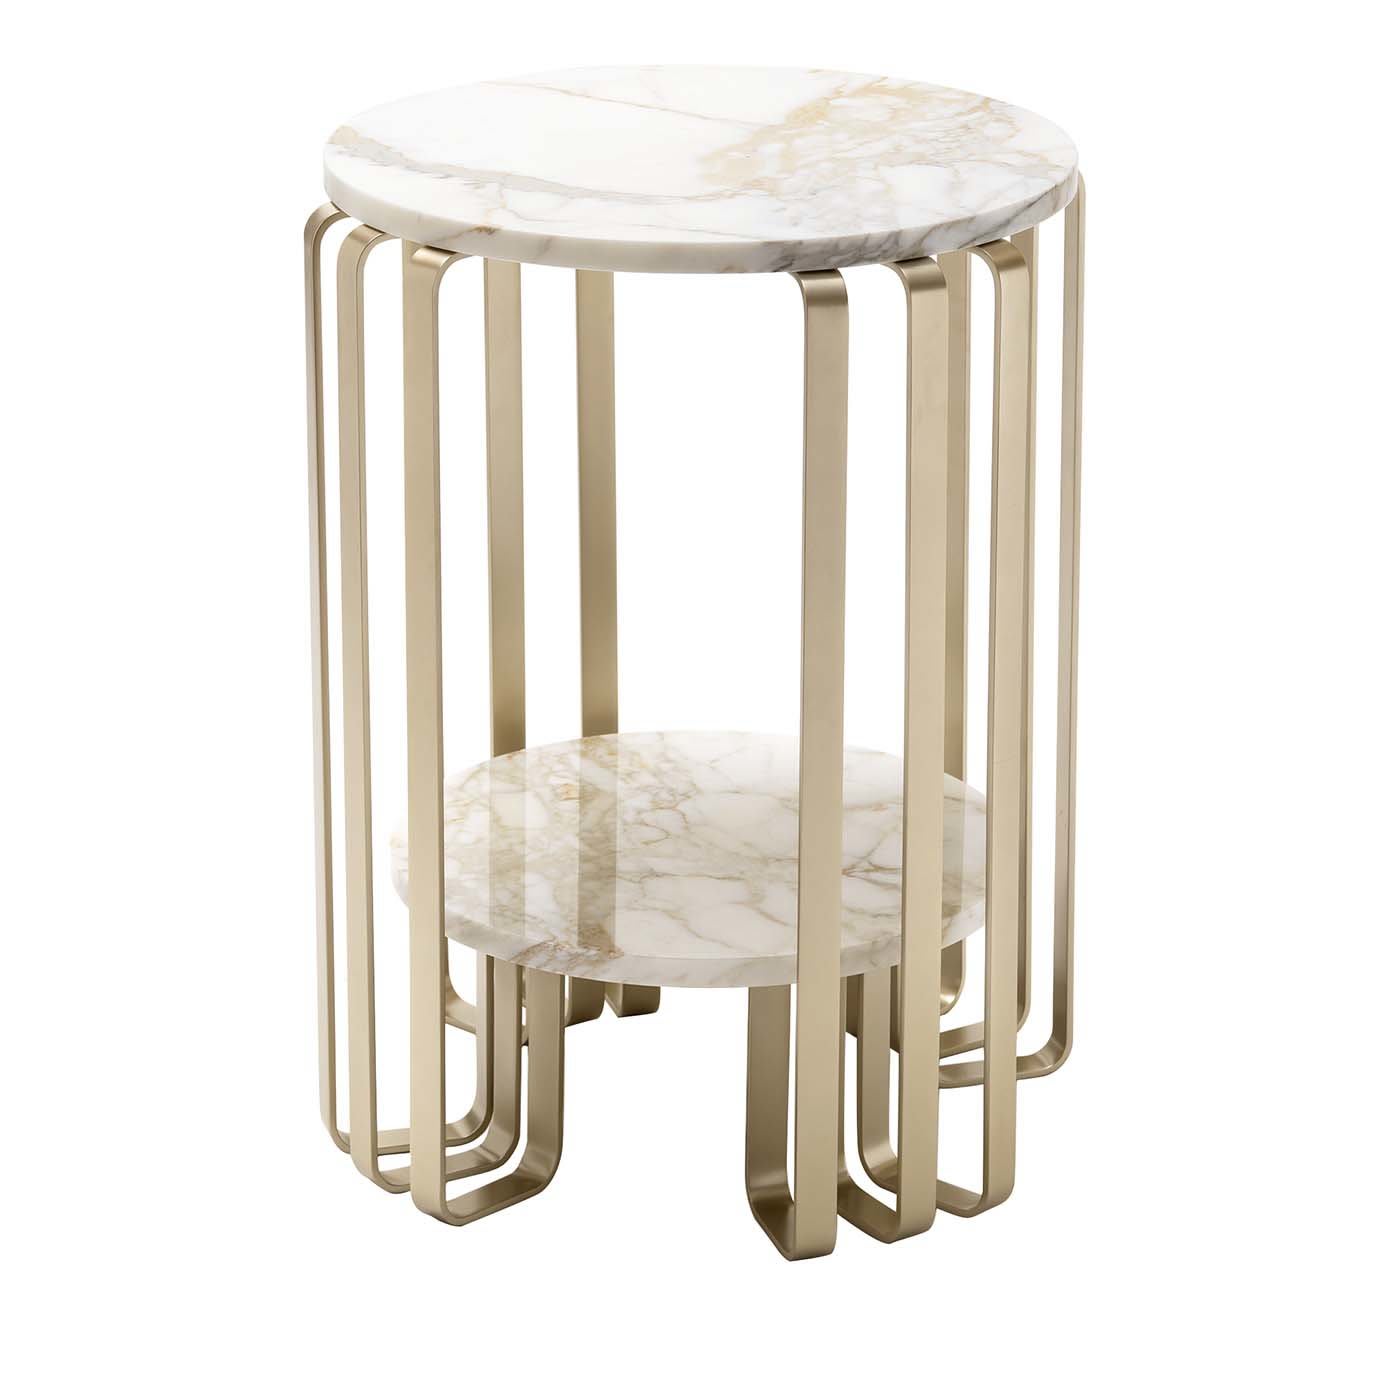 Jazz Tall Round Side Table - Grilli